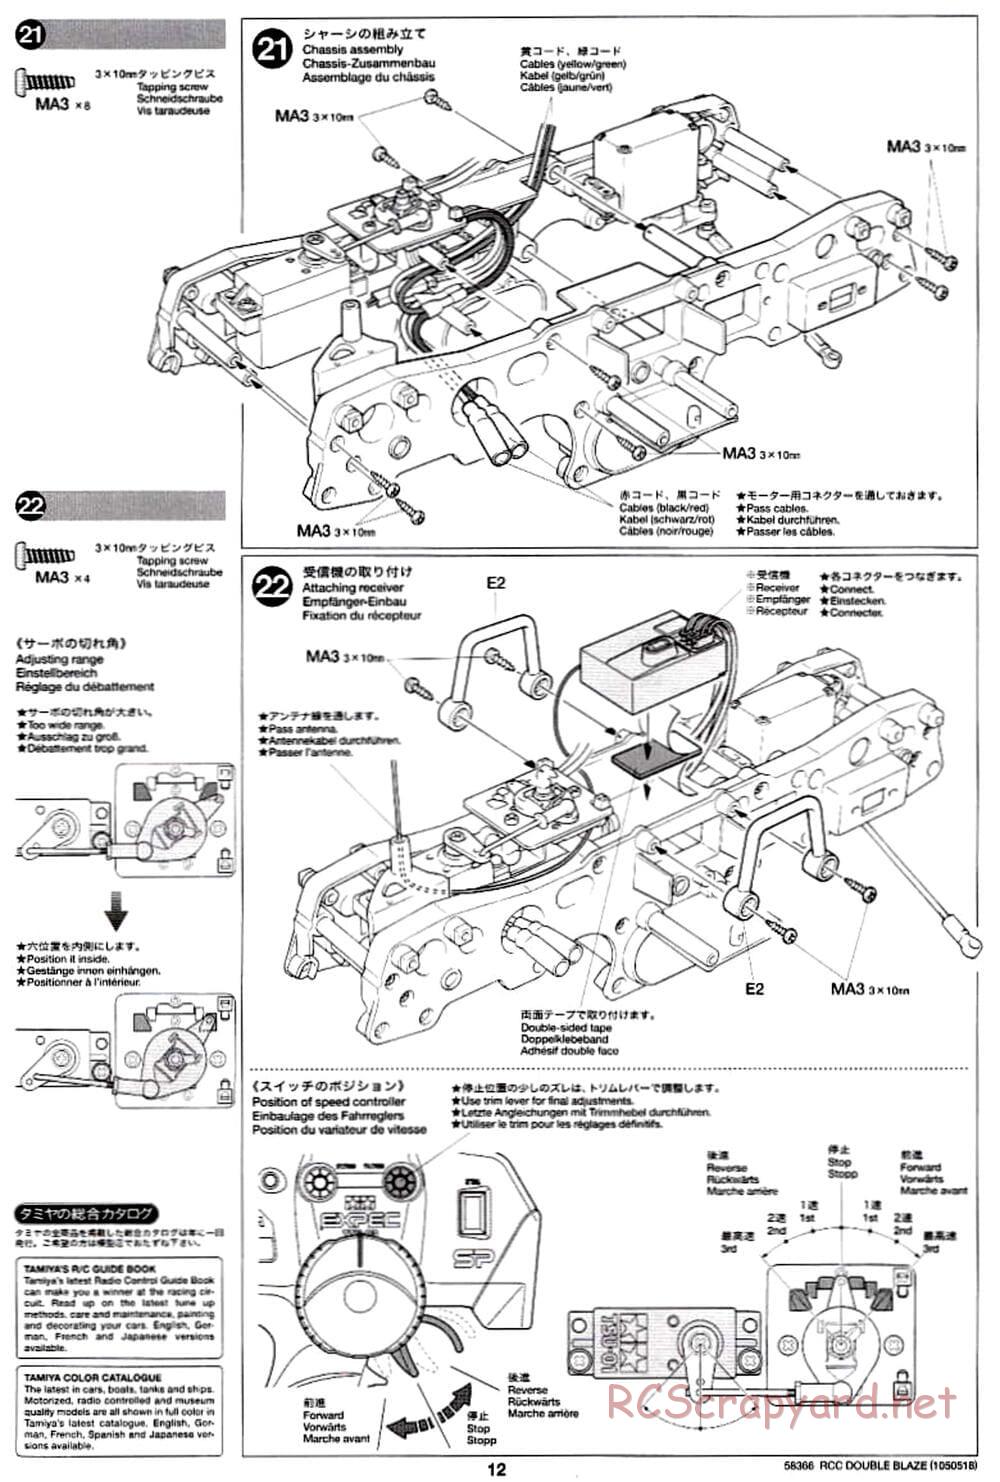 Tamiya - Double Blaze - WR-01 Chassis - Manual - Page 12